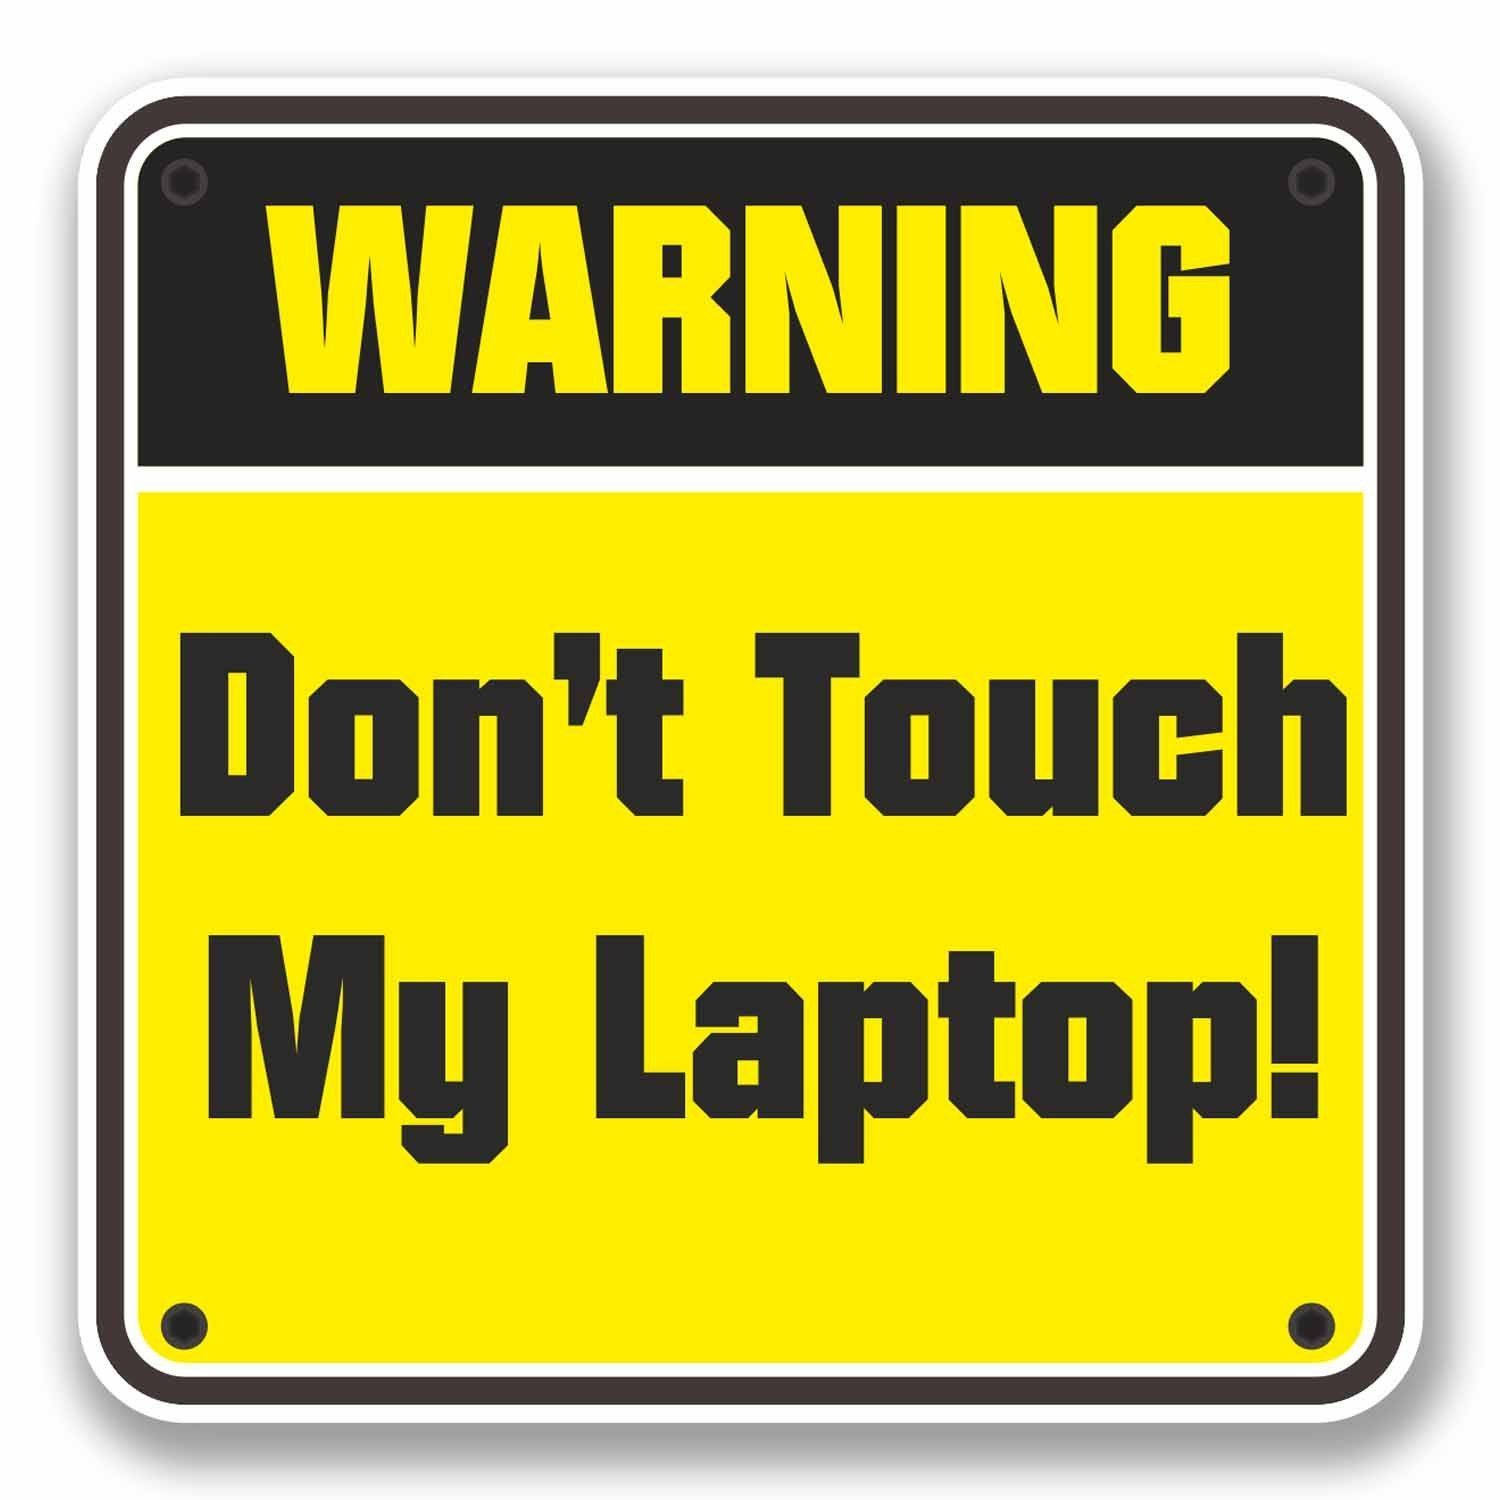 Don't Touch My Computer Warning Sign Wallpaper